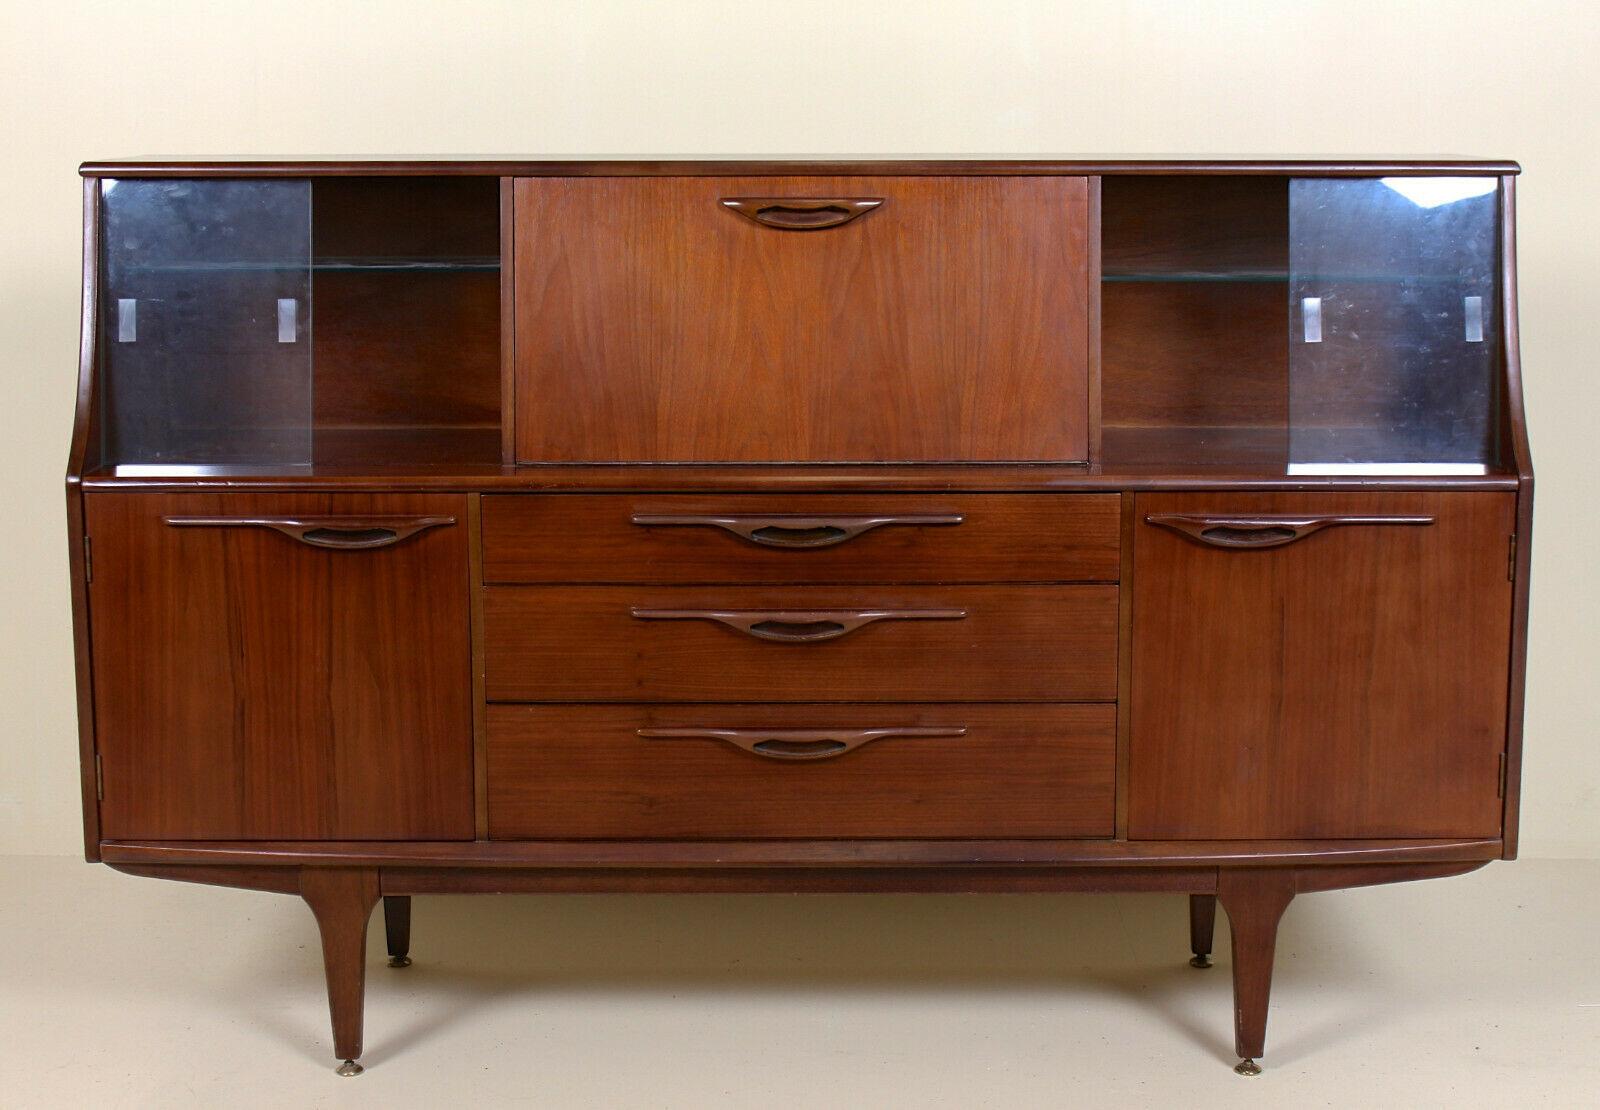 Vintage Teak Cocktail Sideboard Glazed Credenza Cabinet In Good Condition For Sale In Newcastle upon Tyne, GB